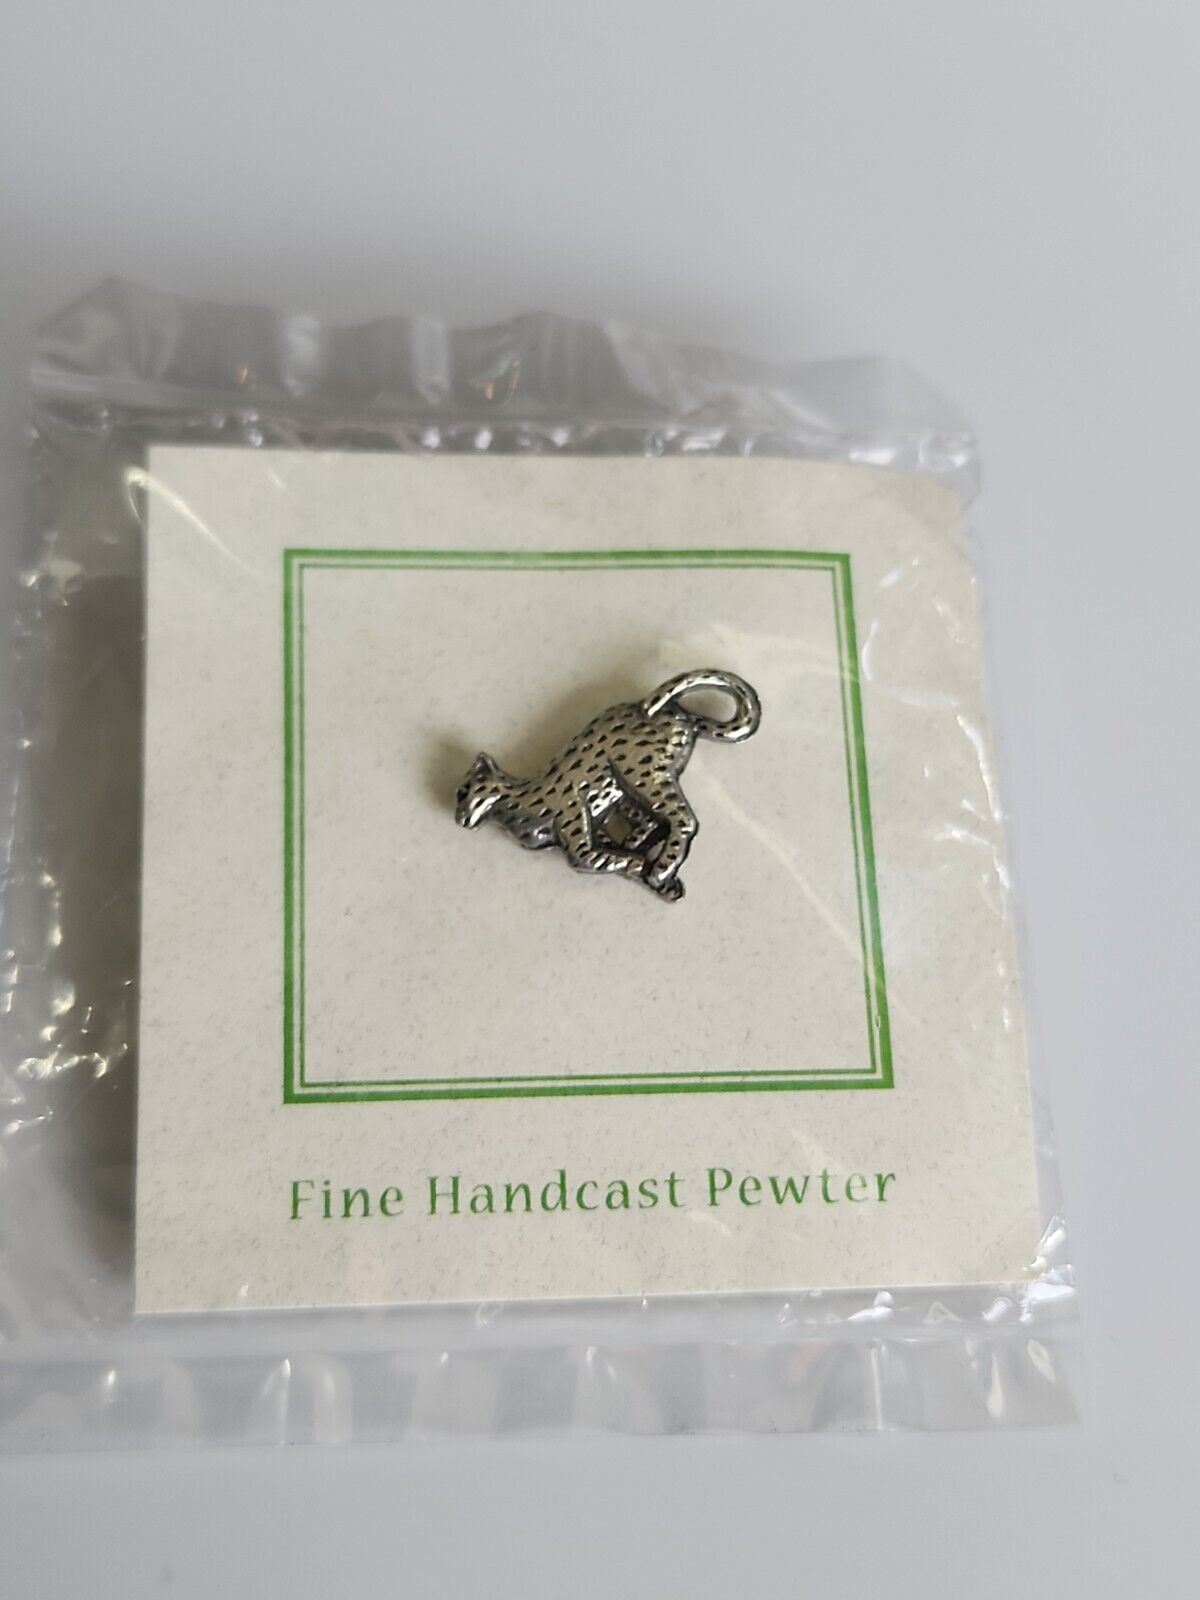 Cheetah Lapel Pin Fine Handcast Pewter by Jim Clift 2005